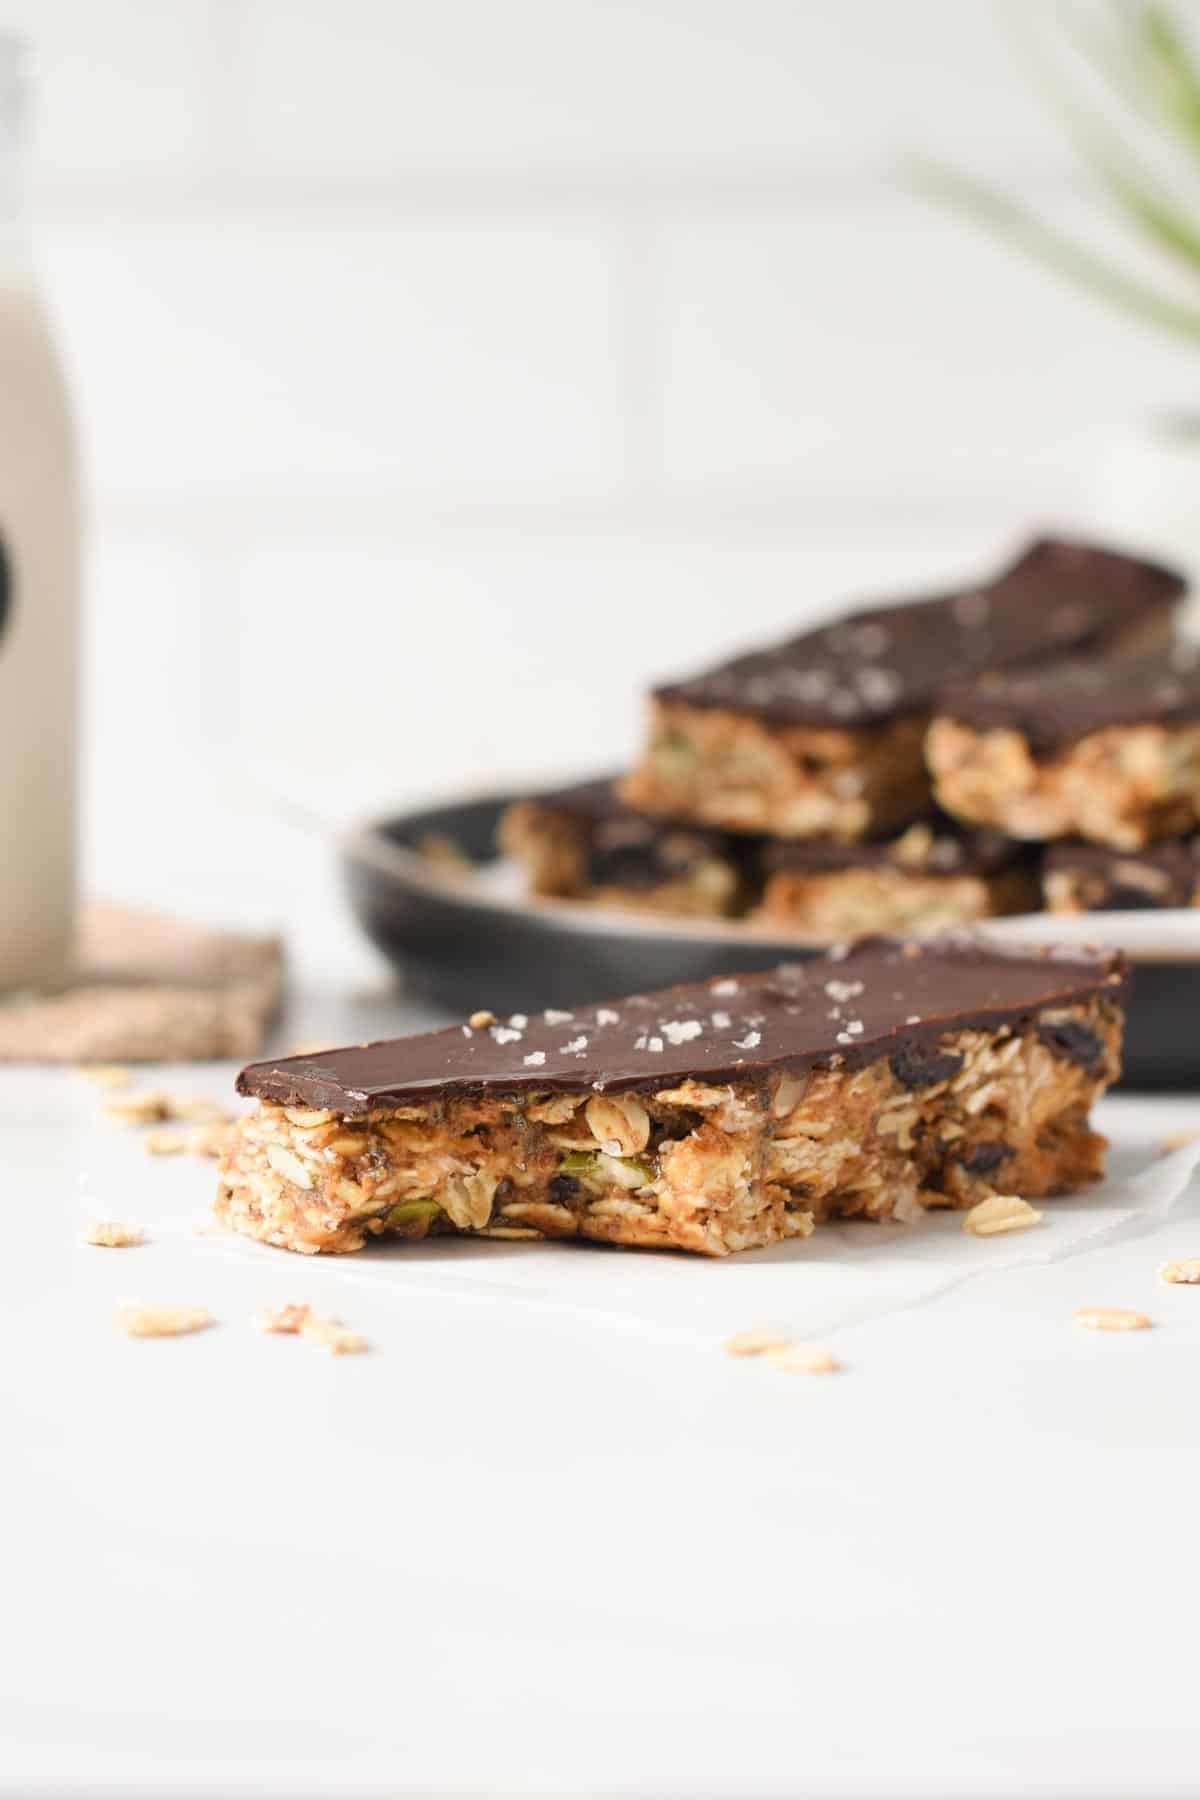 No Bake Granola Bar in front of the plate with other bars.